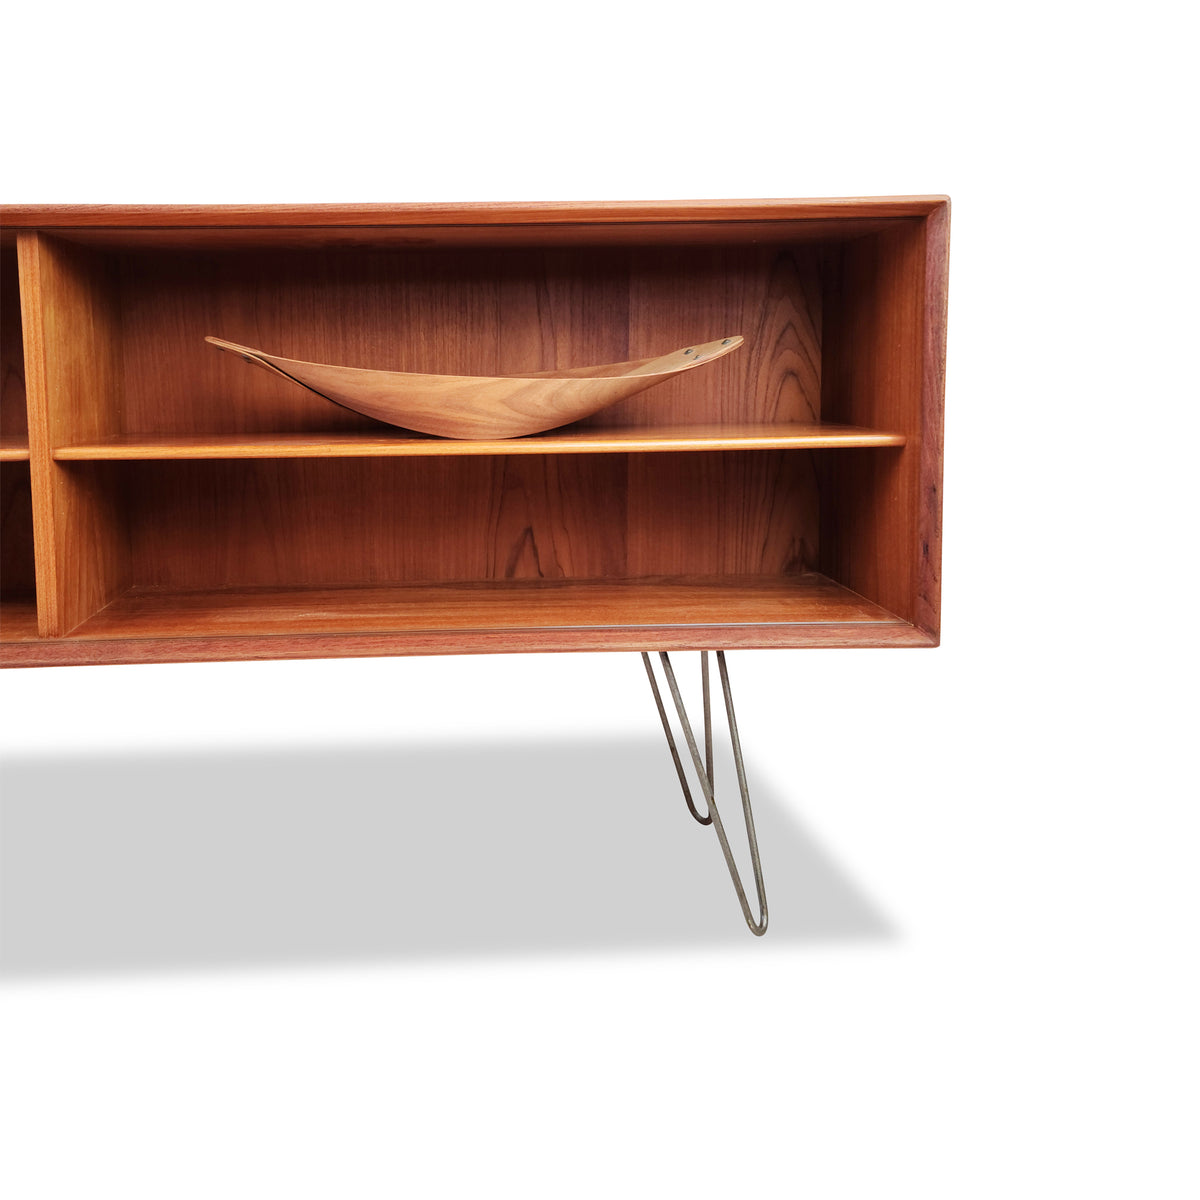 Teak display case by Clausen and Son